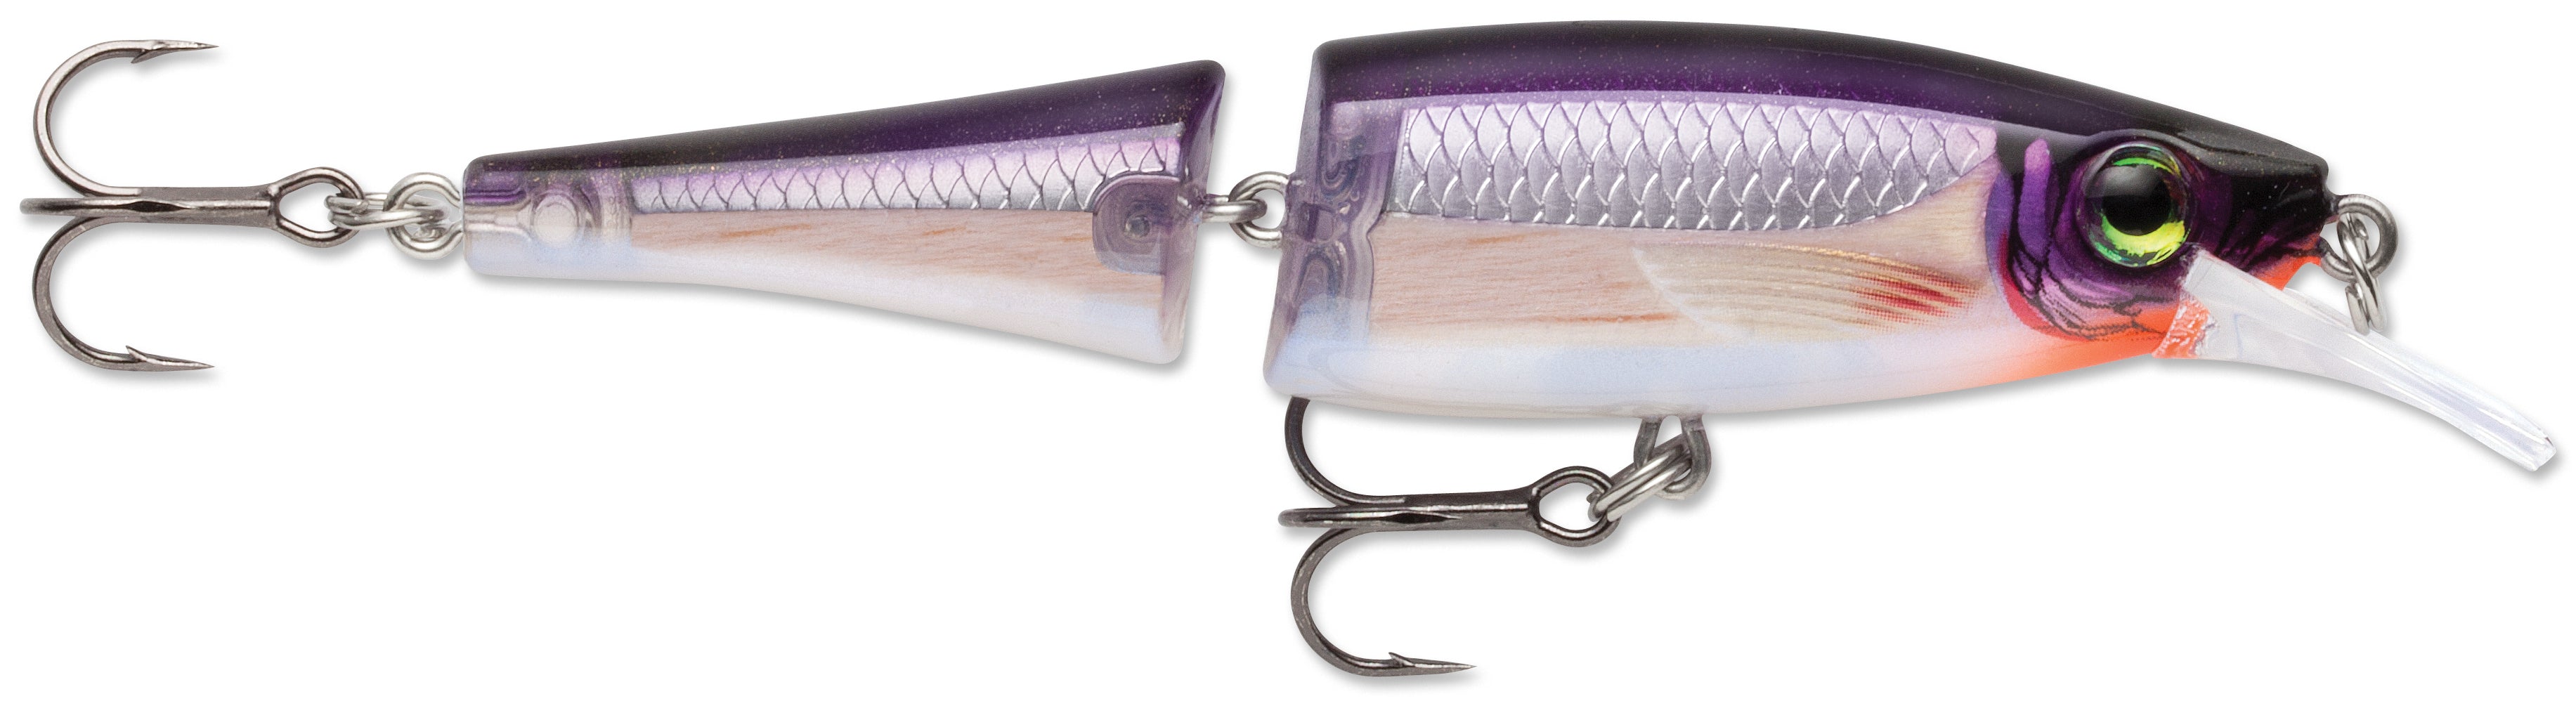 BX Jointed Minnow_Purpledescent